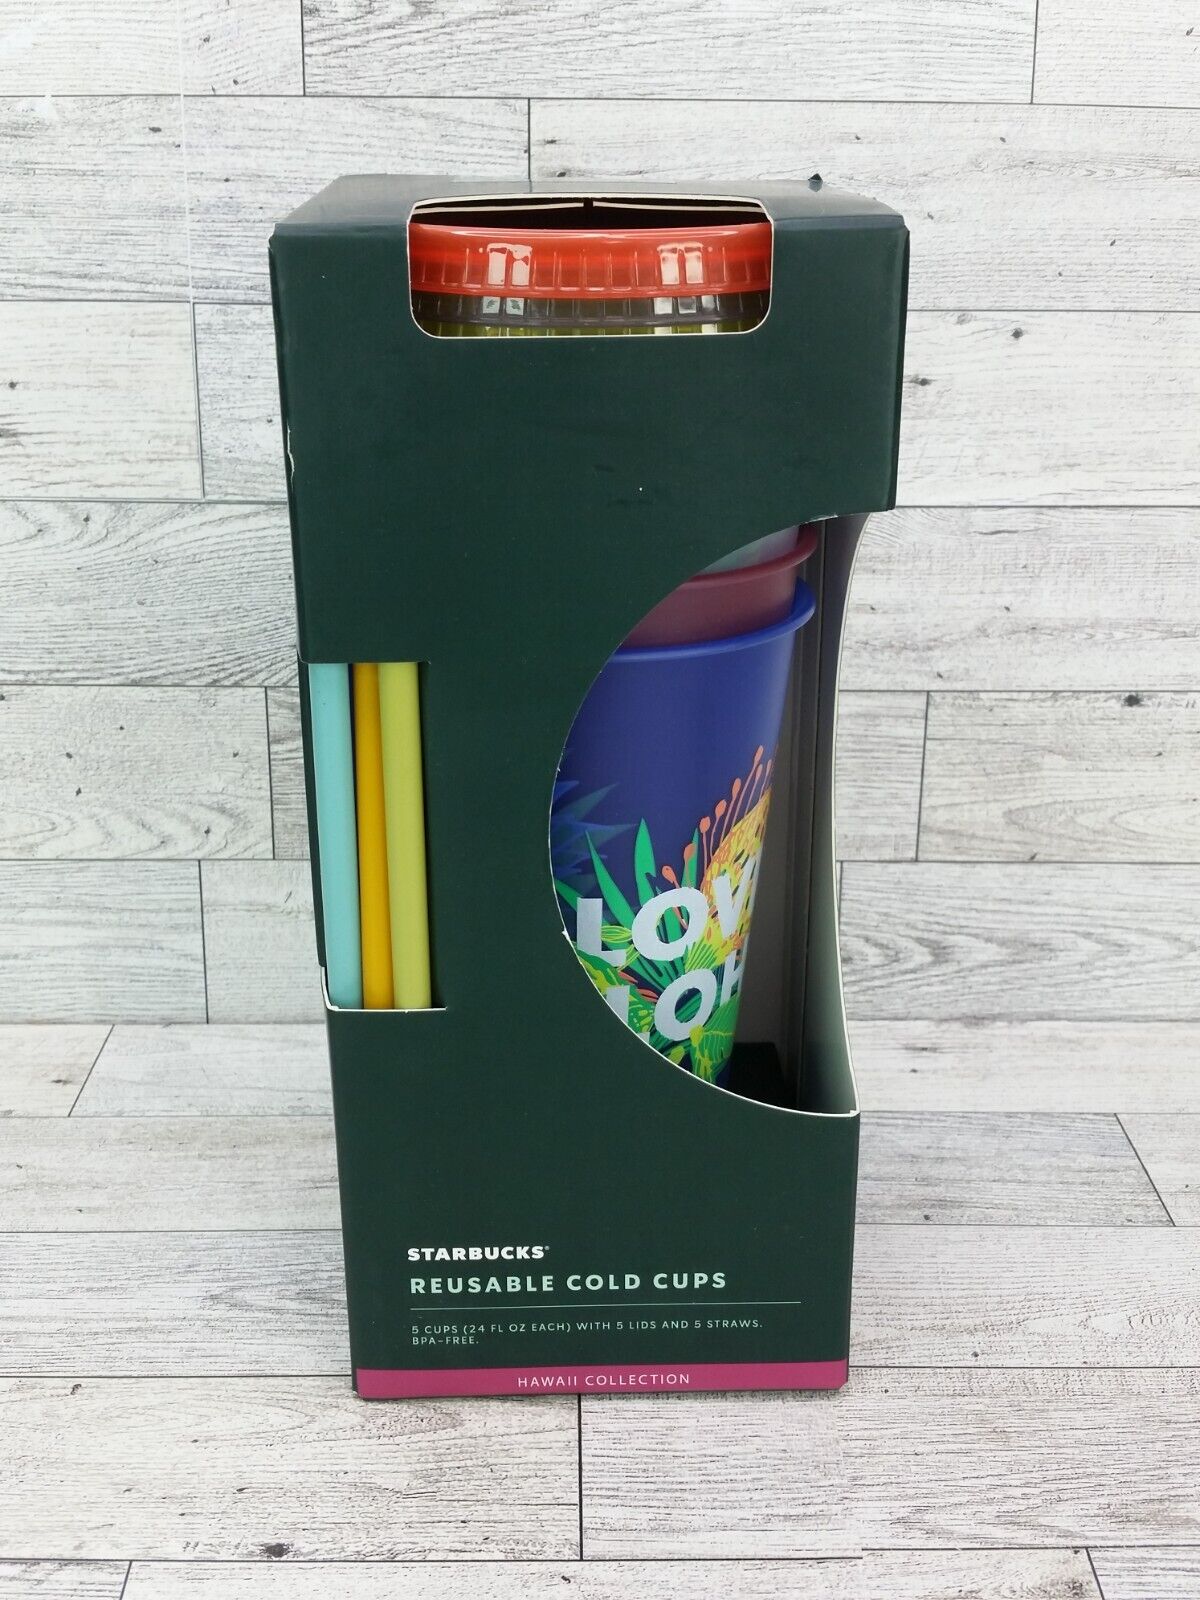 Starbucks 2020 Hawaii Collection 24oz Reusable Cold Cups with Straws 5 Pack NEW